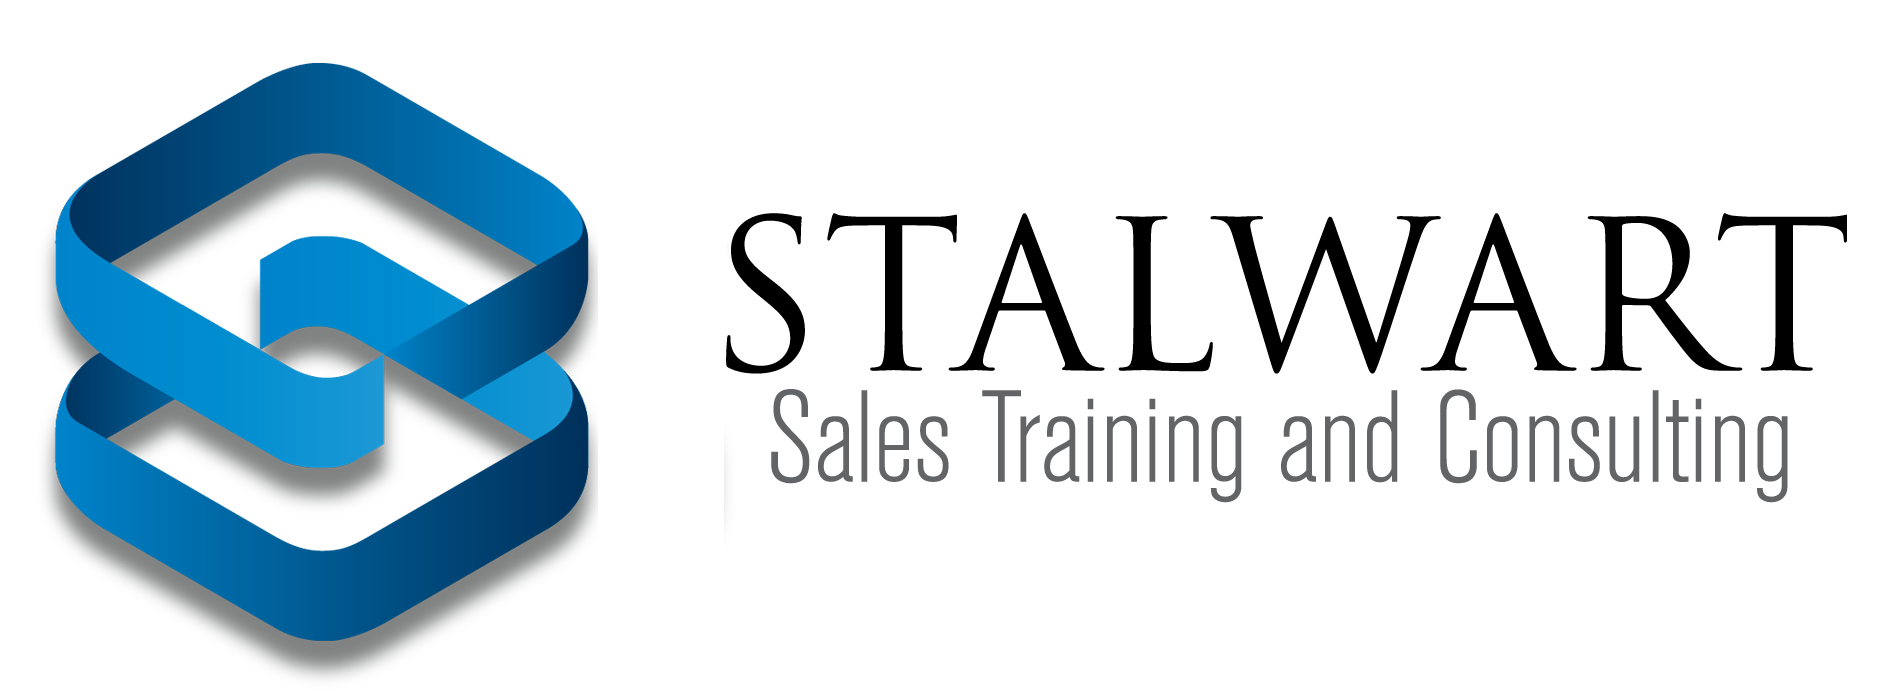 Stalwart Sales Training and Consulting